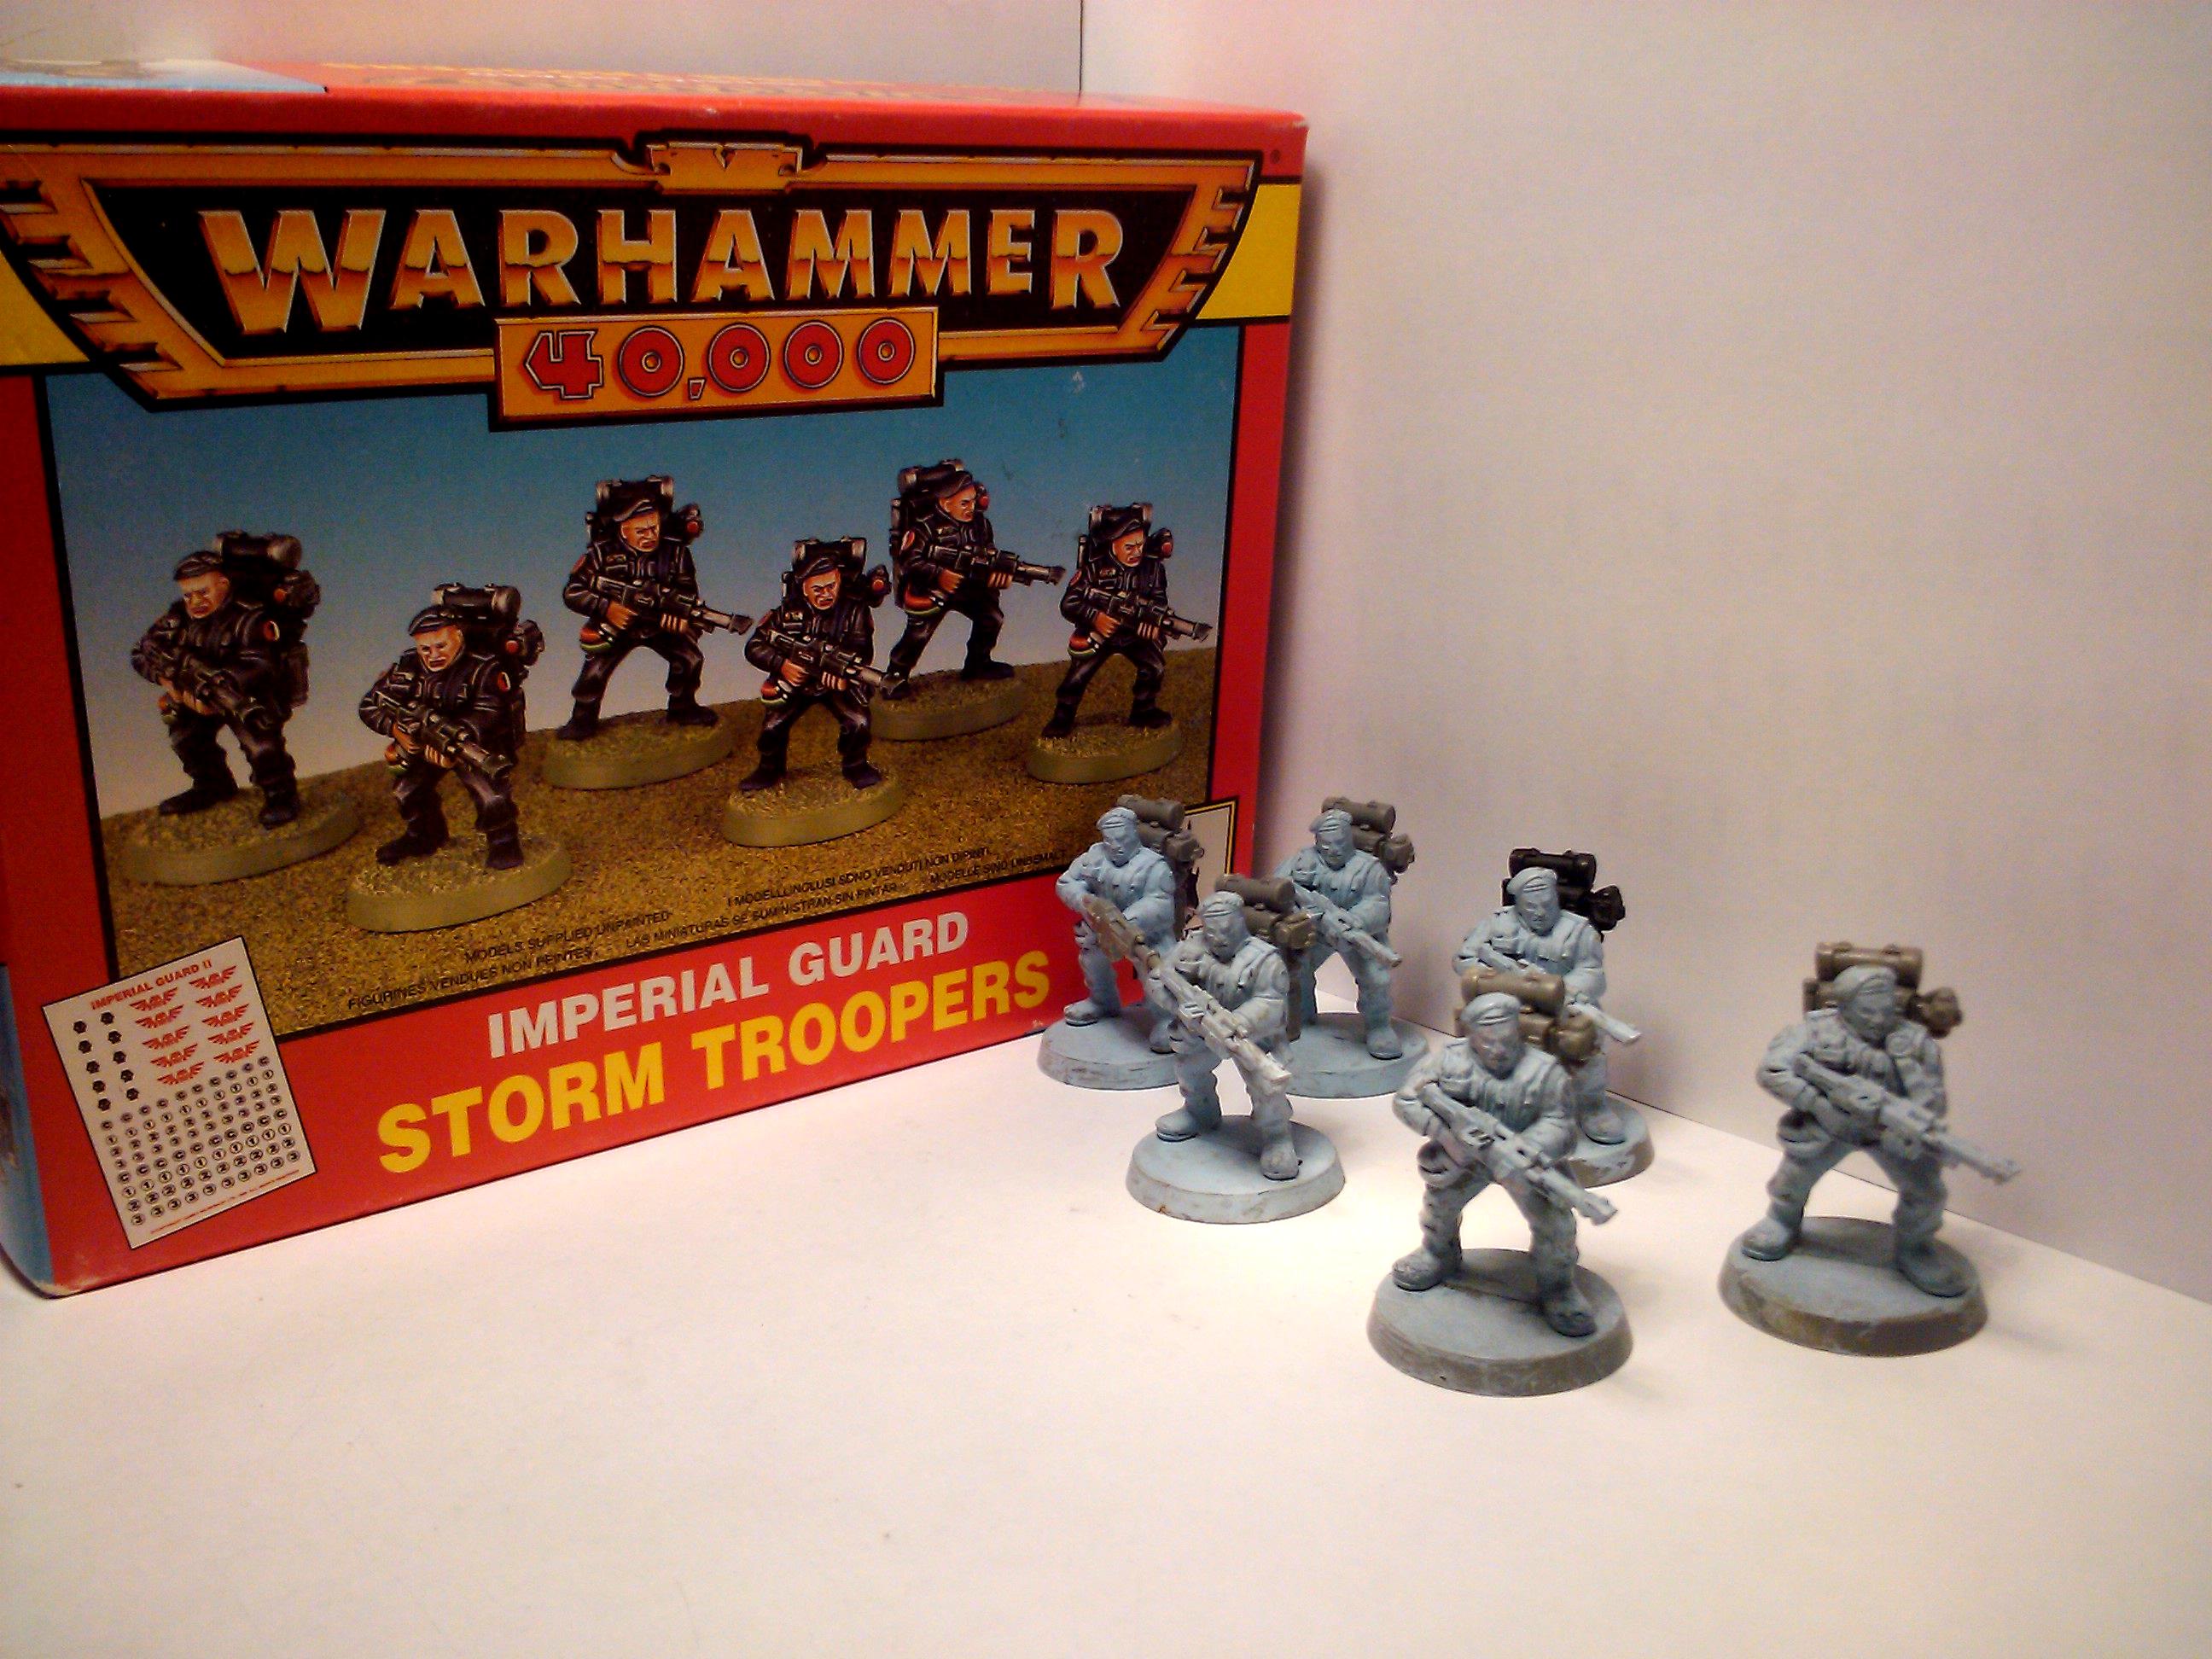 Battle Force, Cadians, Imperial Guard, Storm Troopers, Warhammer 40,000